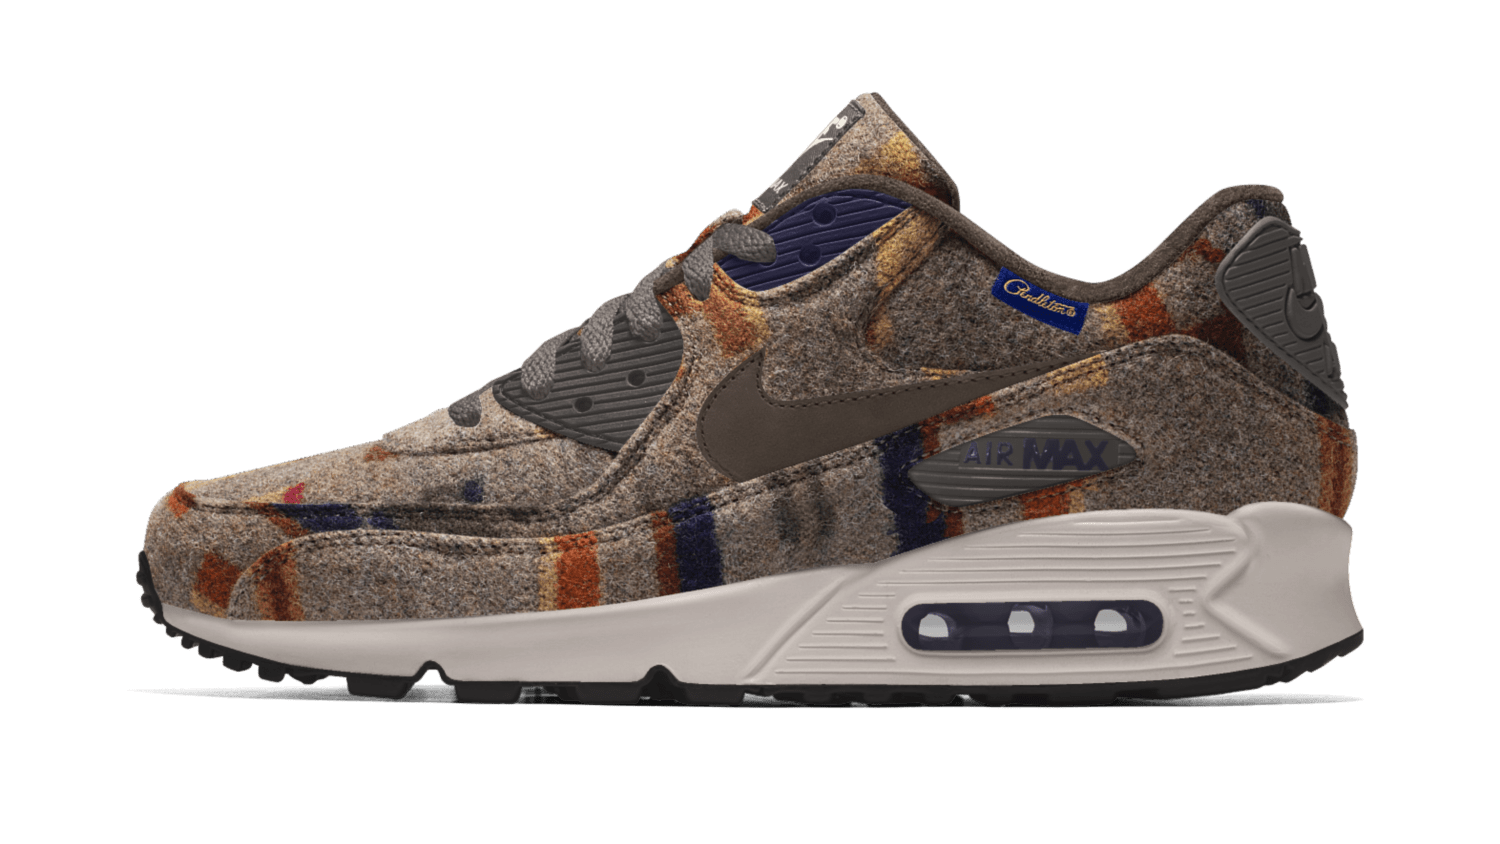 New Pendleton Air Max Options on Nike iD | Complex